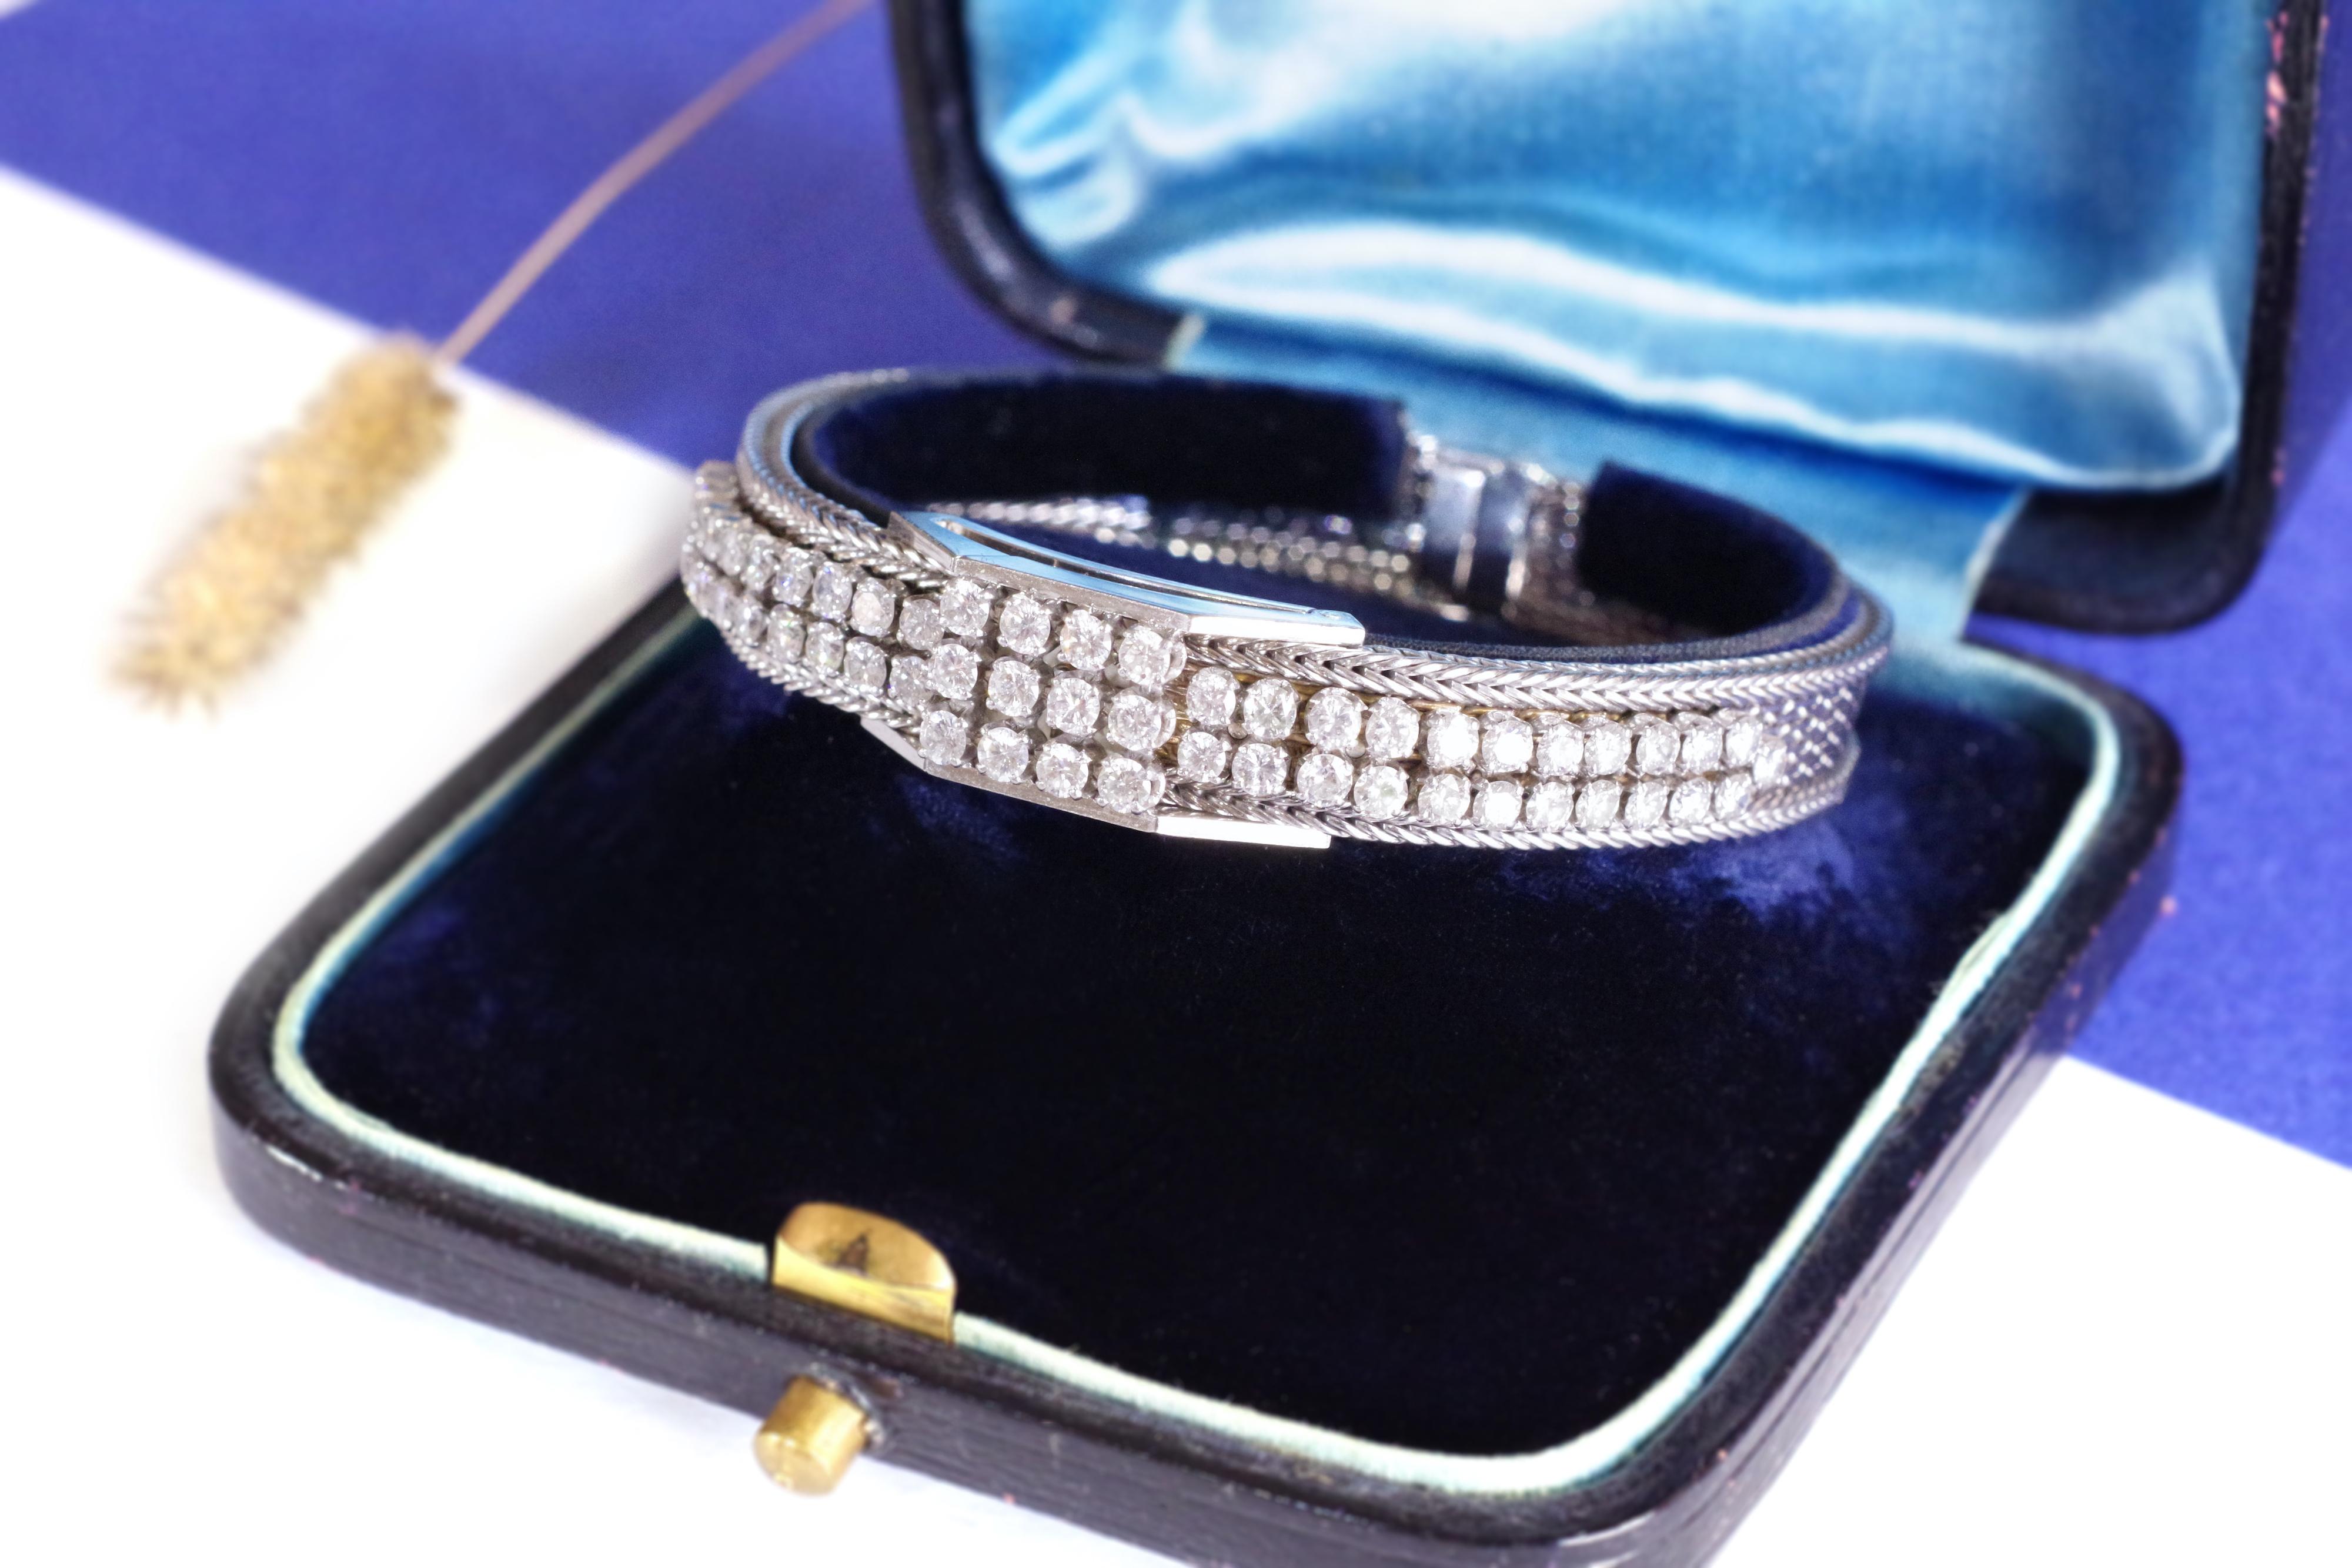 Lady Bracelet Diamond Concealed Watch by Blancpain, 18k Gold and Platinum, 1970 For Sale 2